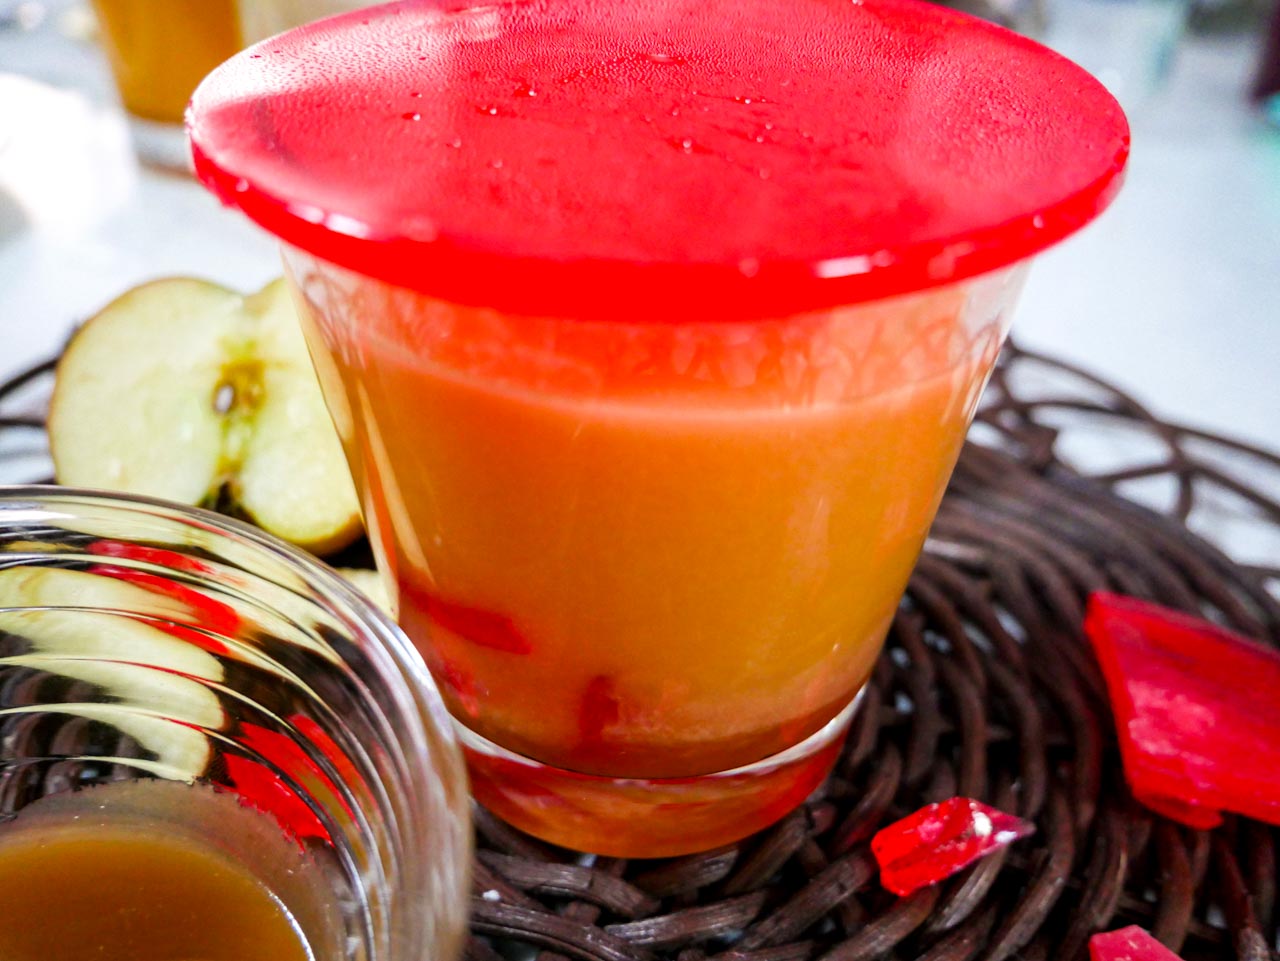 Apple cider with candy cap